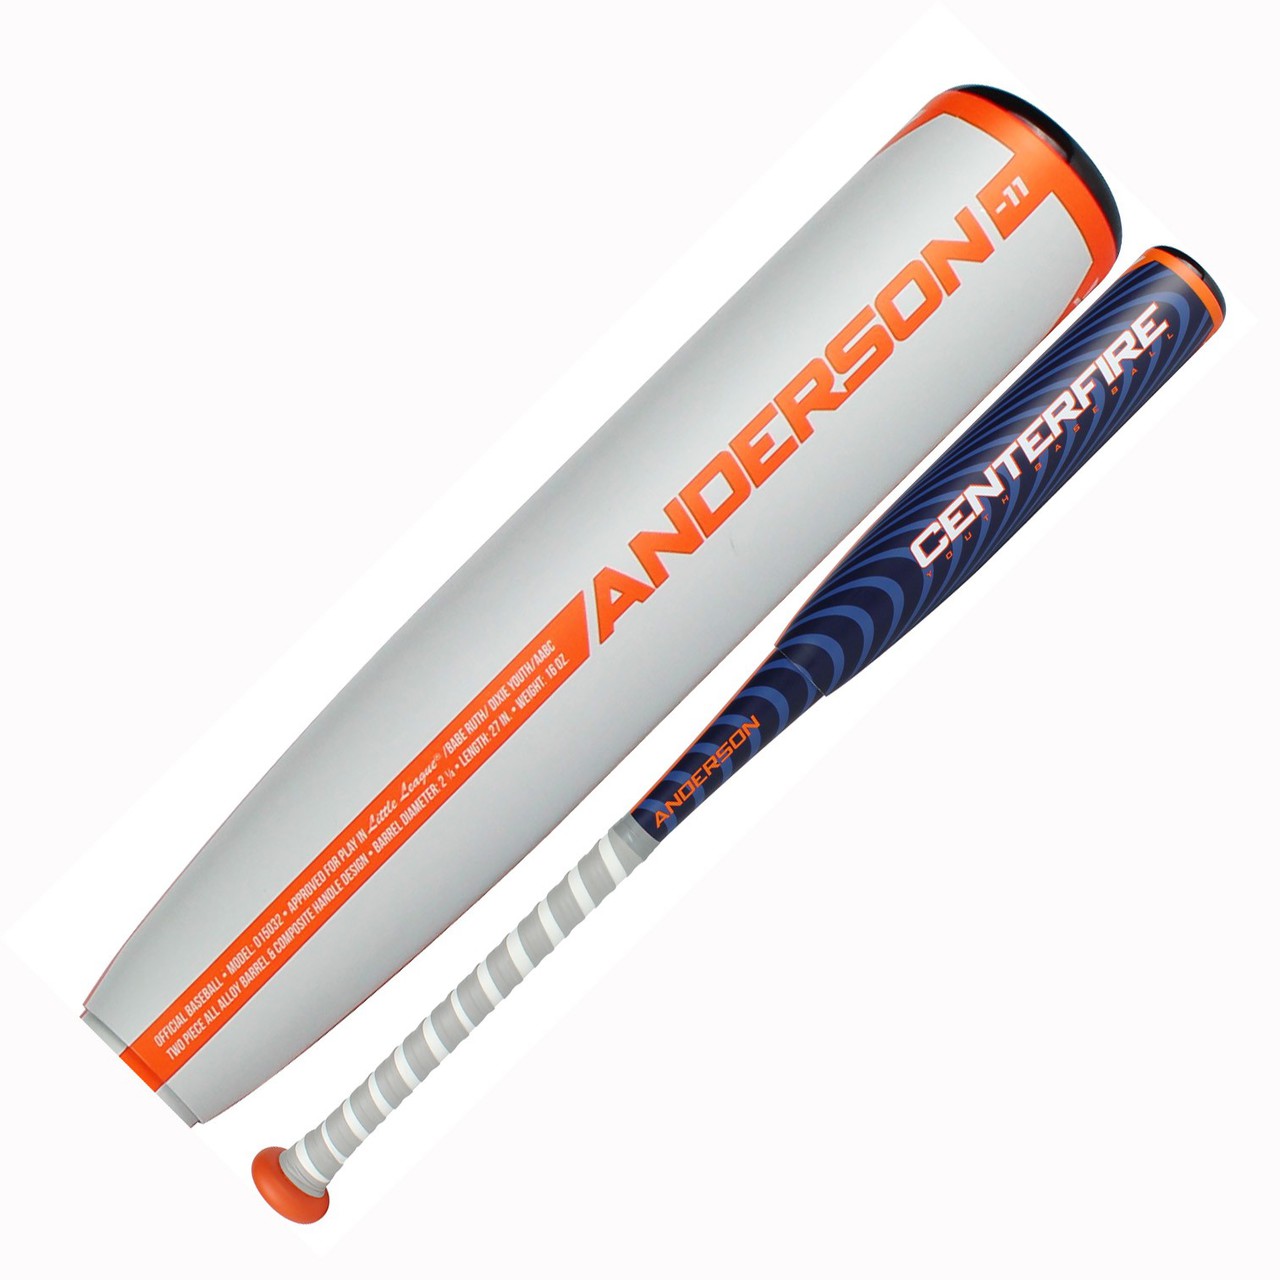 anderson-centerfire-31-inch-20-oz-youth-baseball-bat 015032-31-inch-20-oz Anderson 874147007716 The Anderson Centerfire baseball bat is our latest addition to our